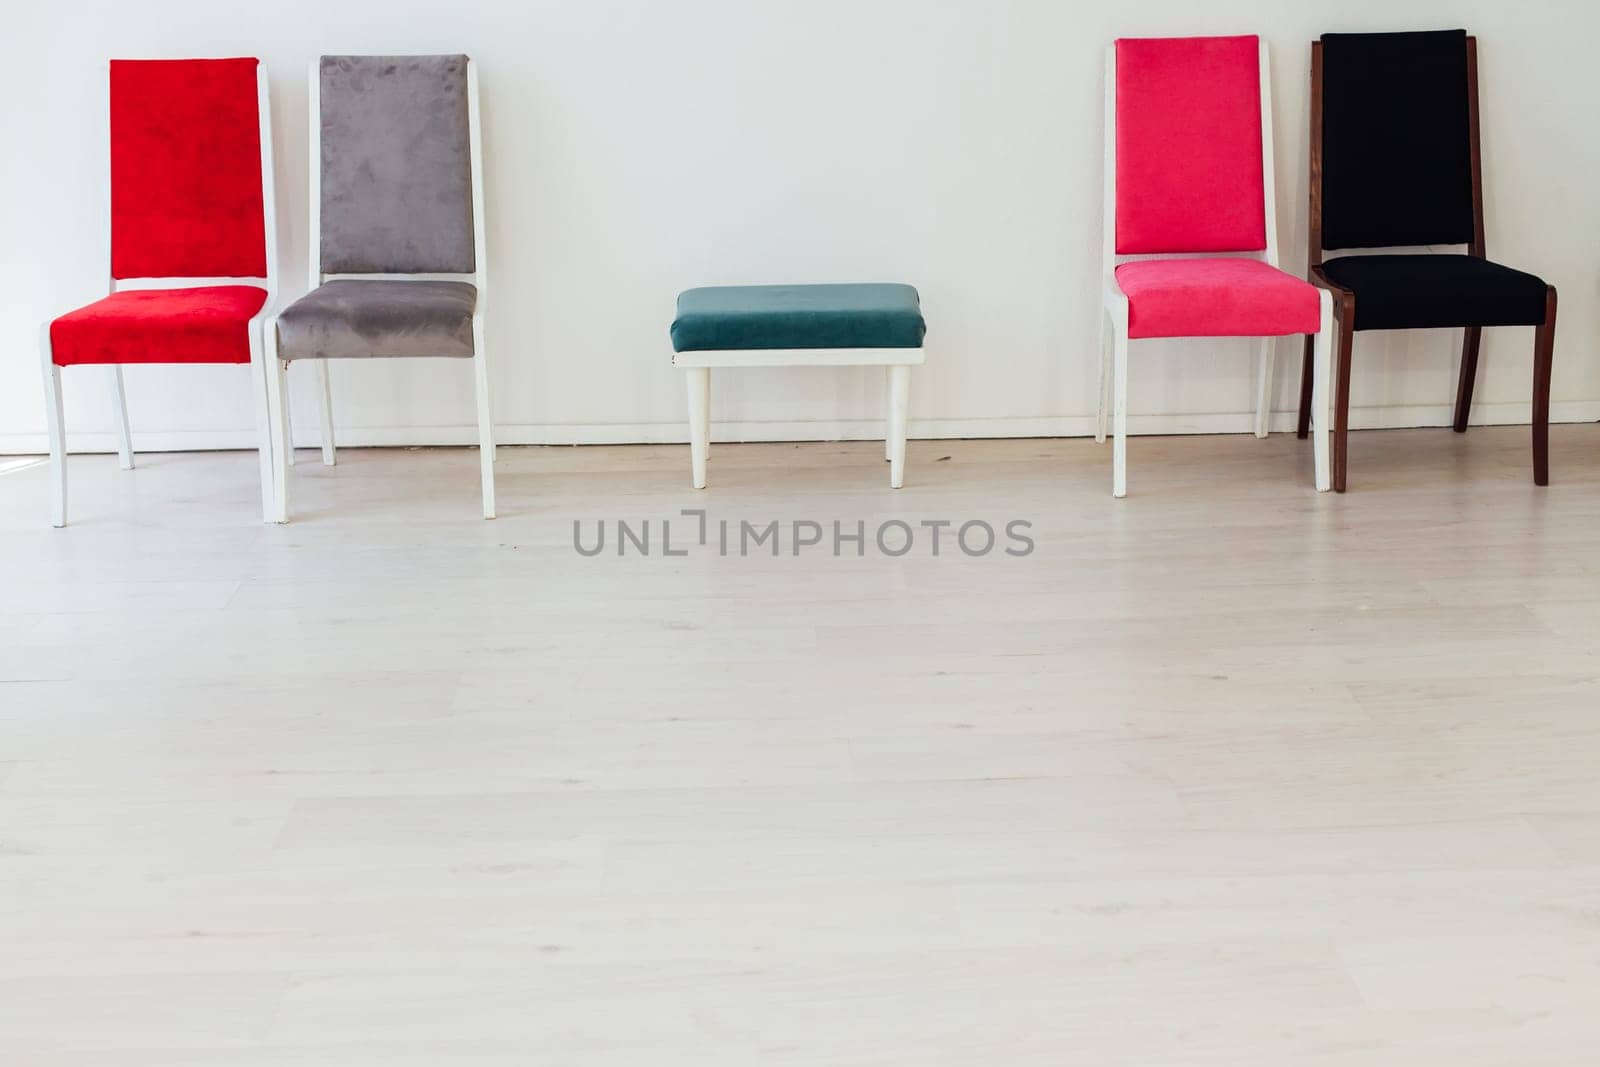 five chairs in an empty white interior room by Simakov